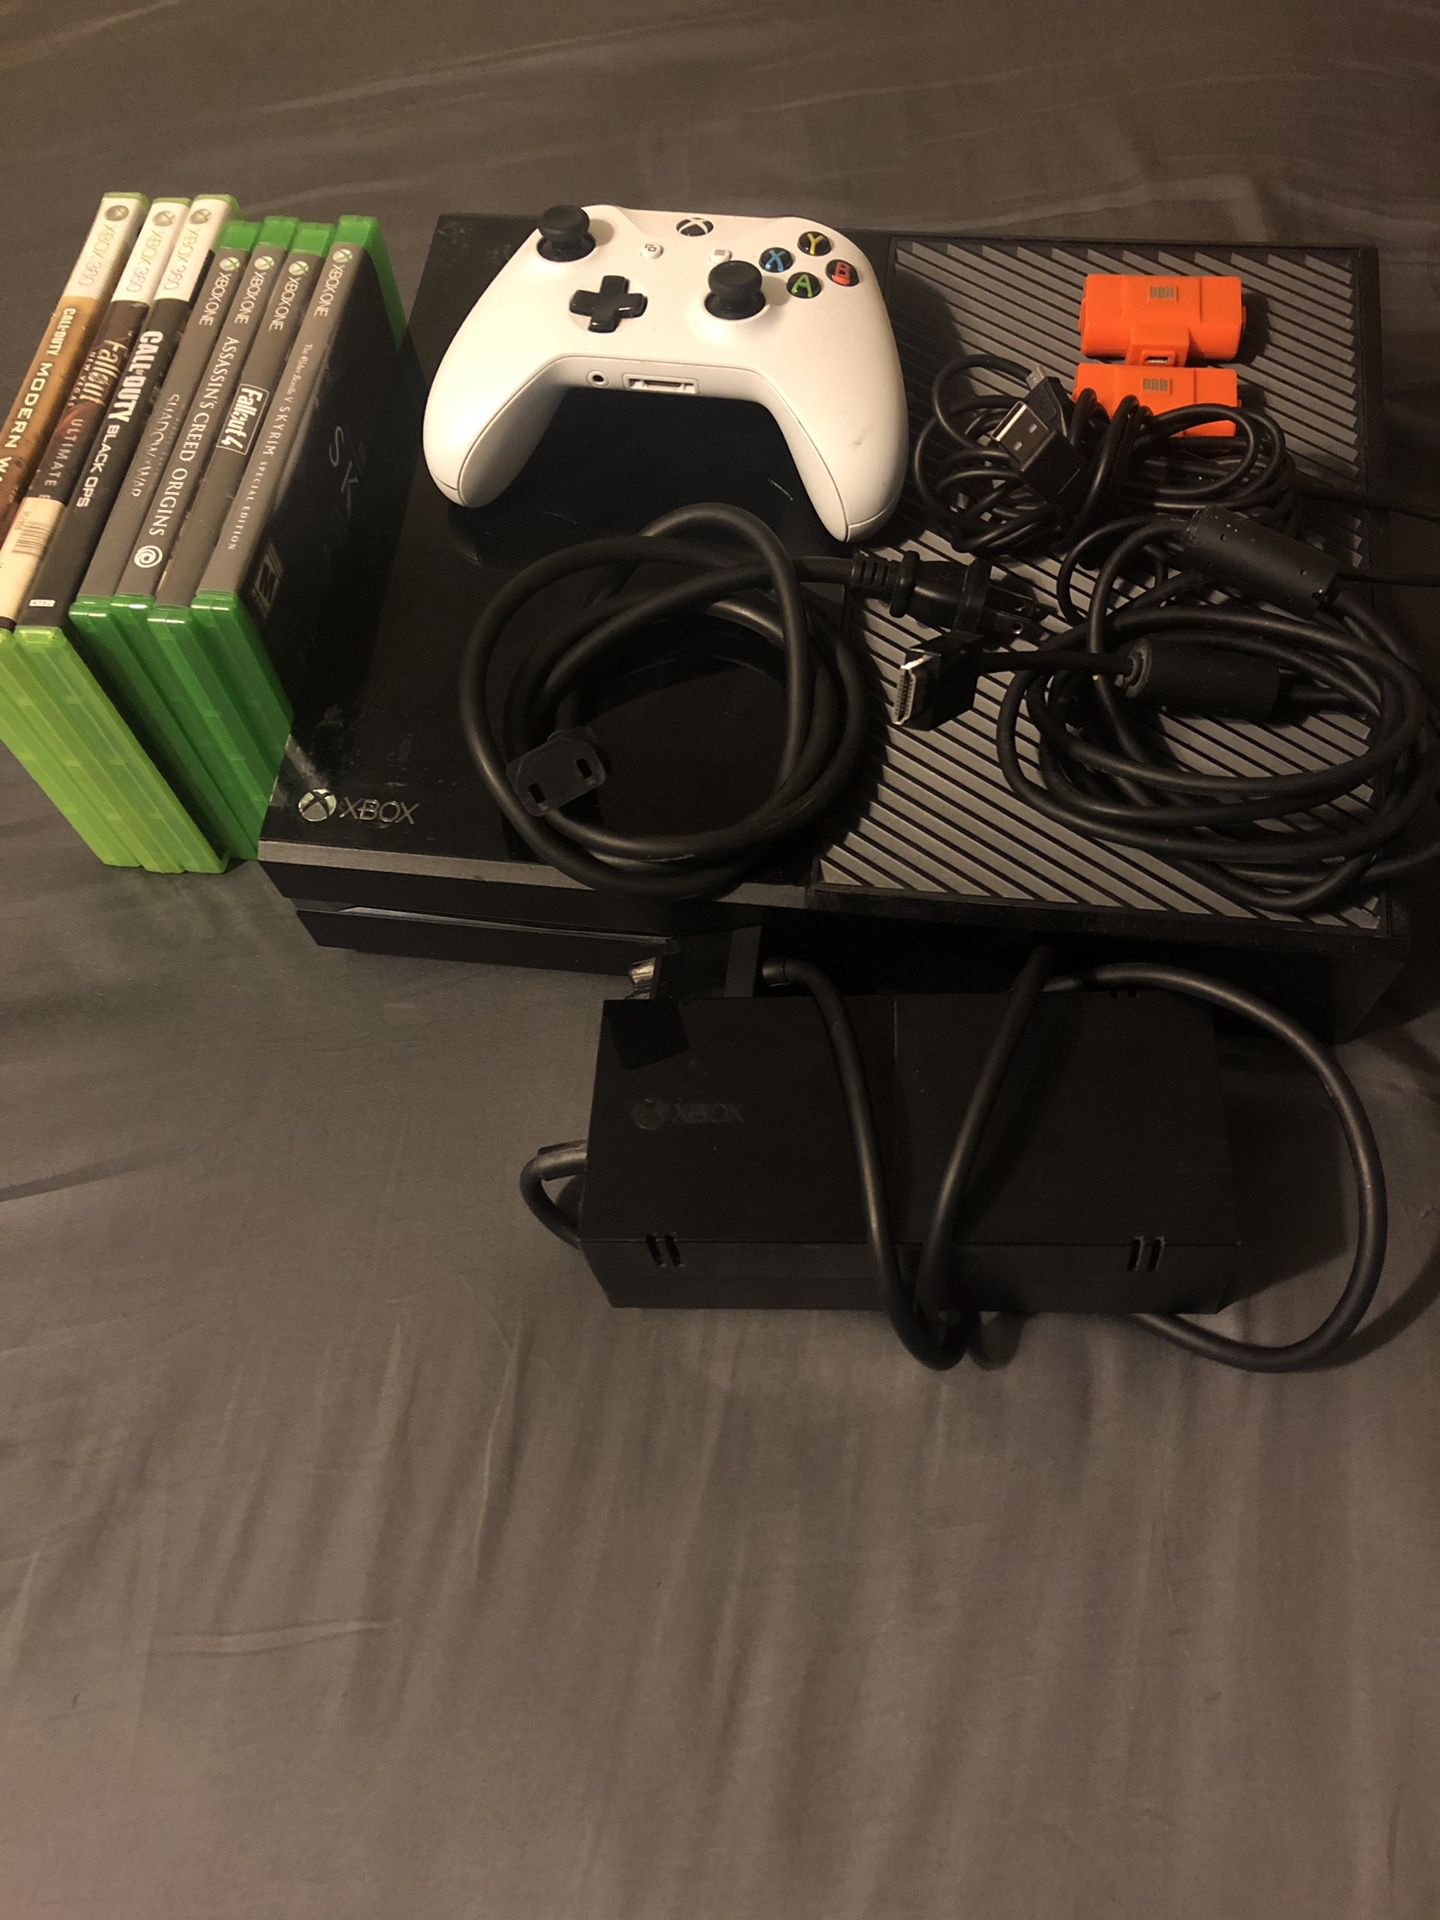 500 GB Xbox One and games